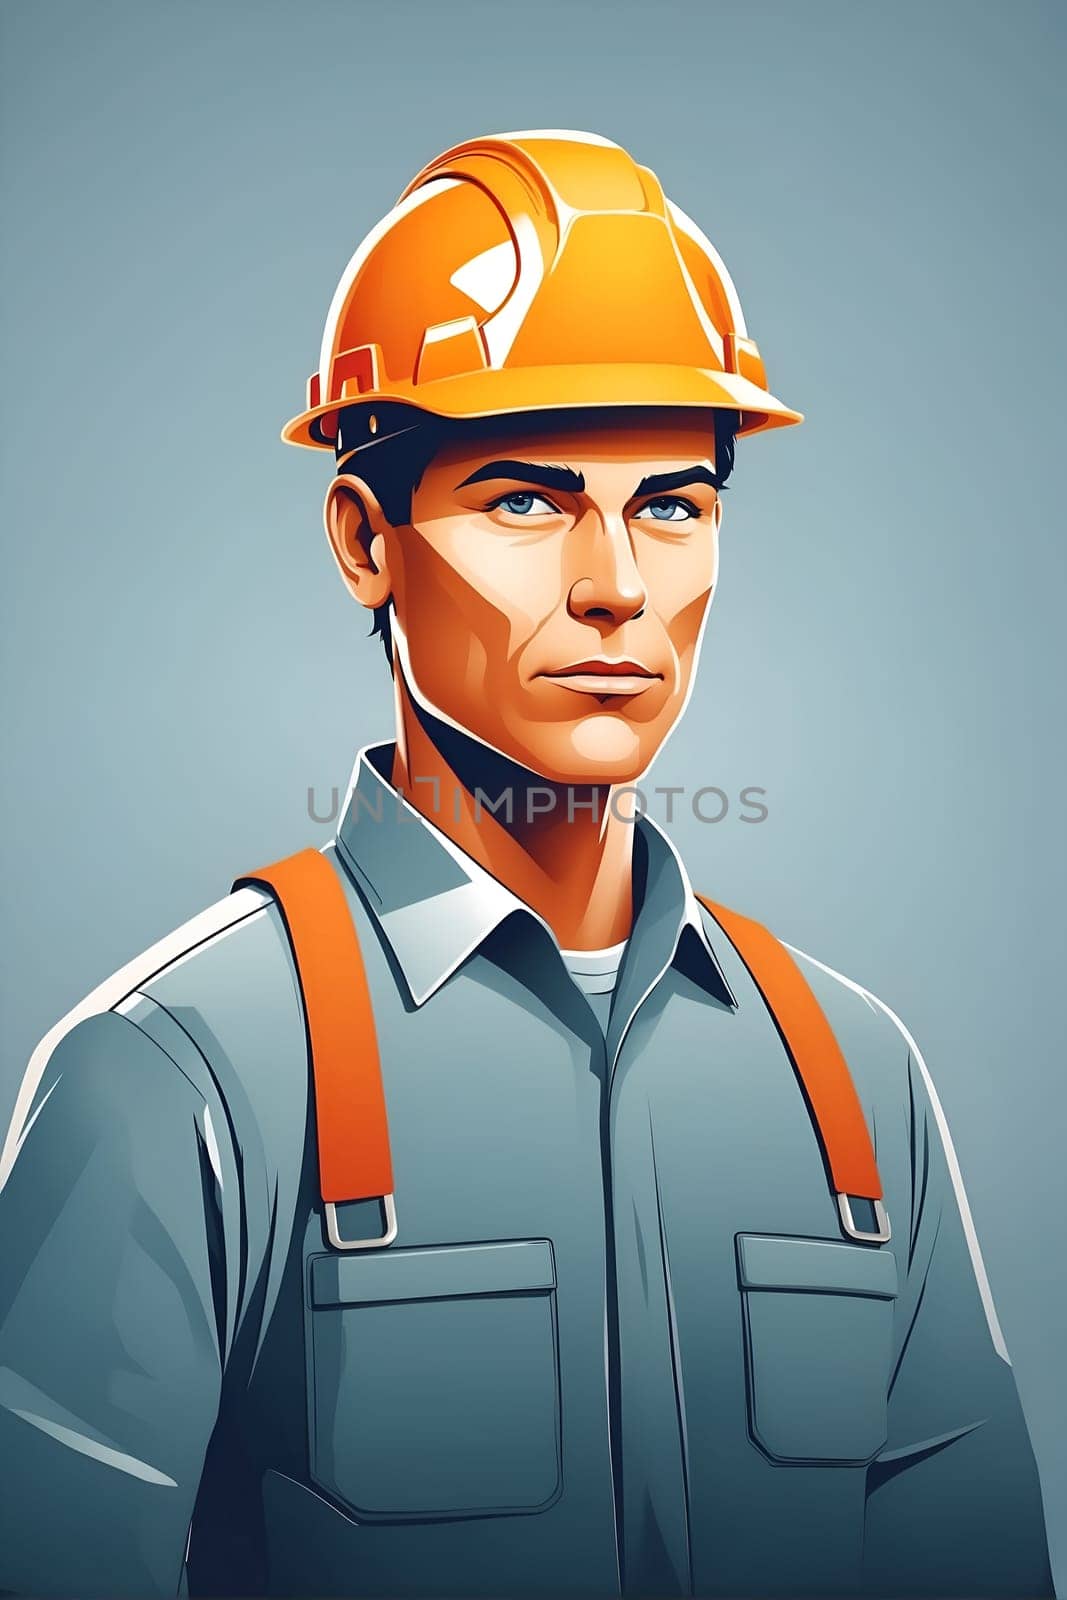 A man is shown wearing a hard hat and overalls, ensuring his safety at a construction site.